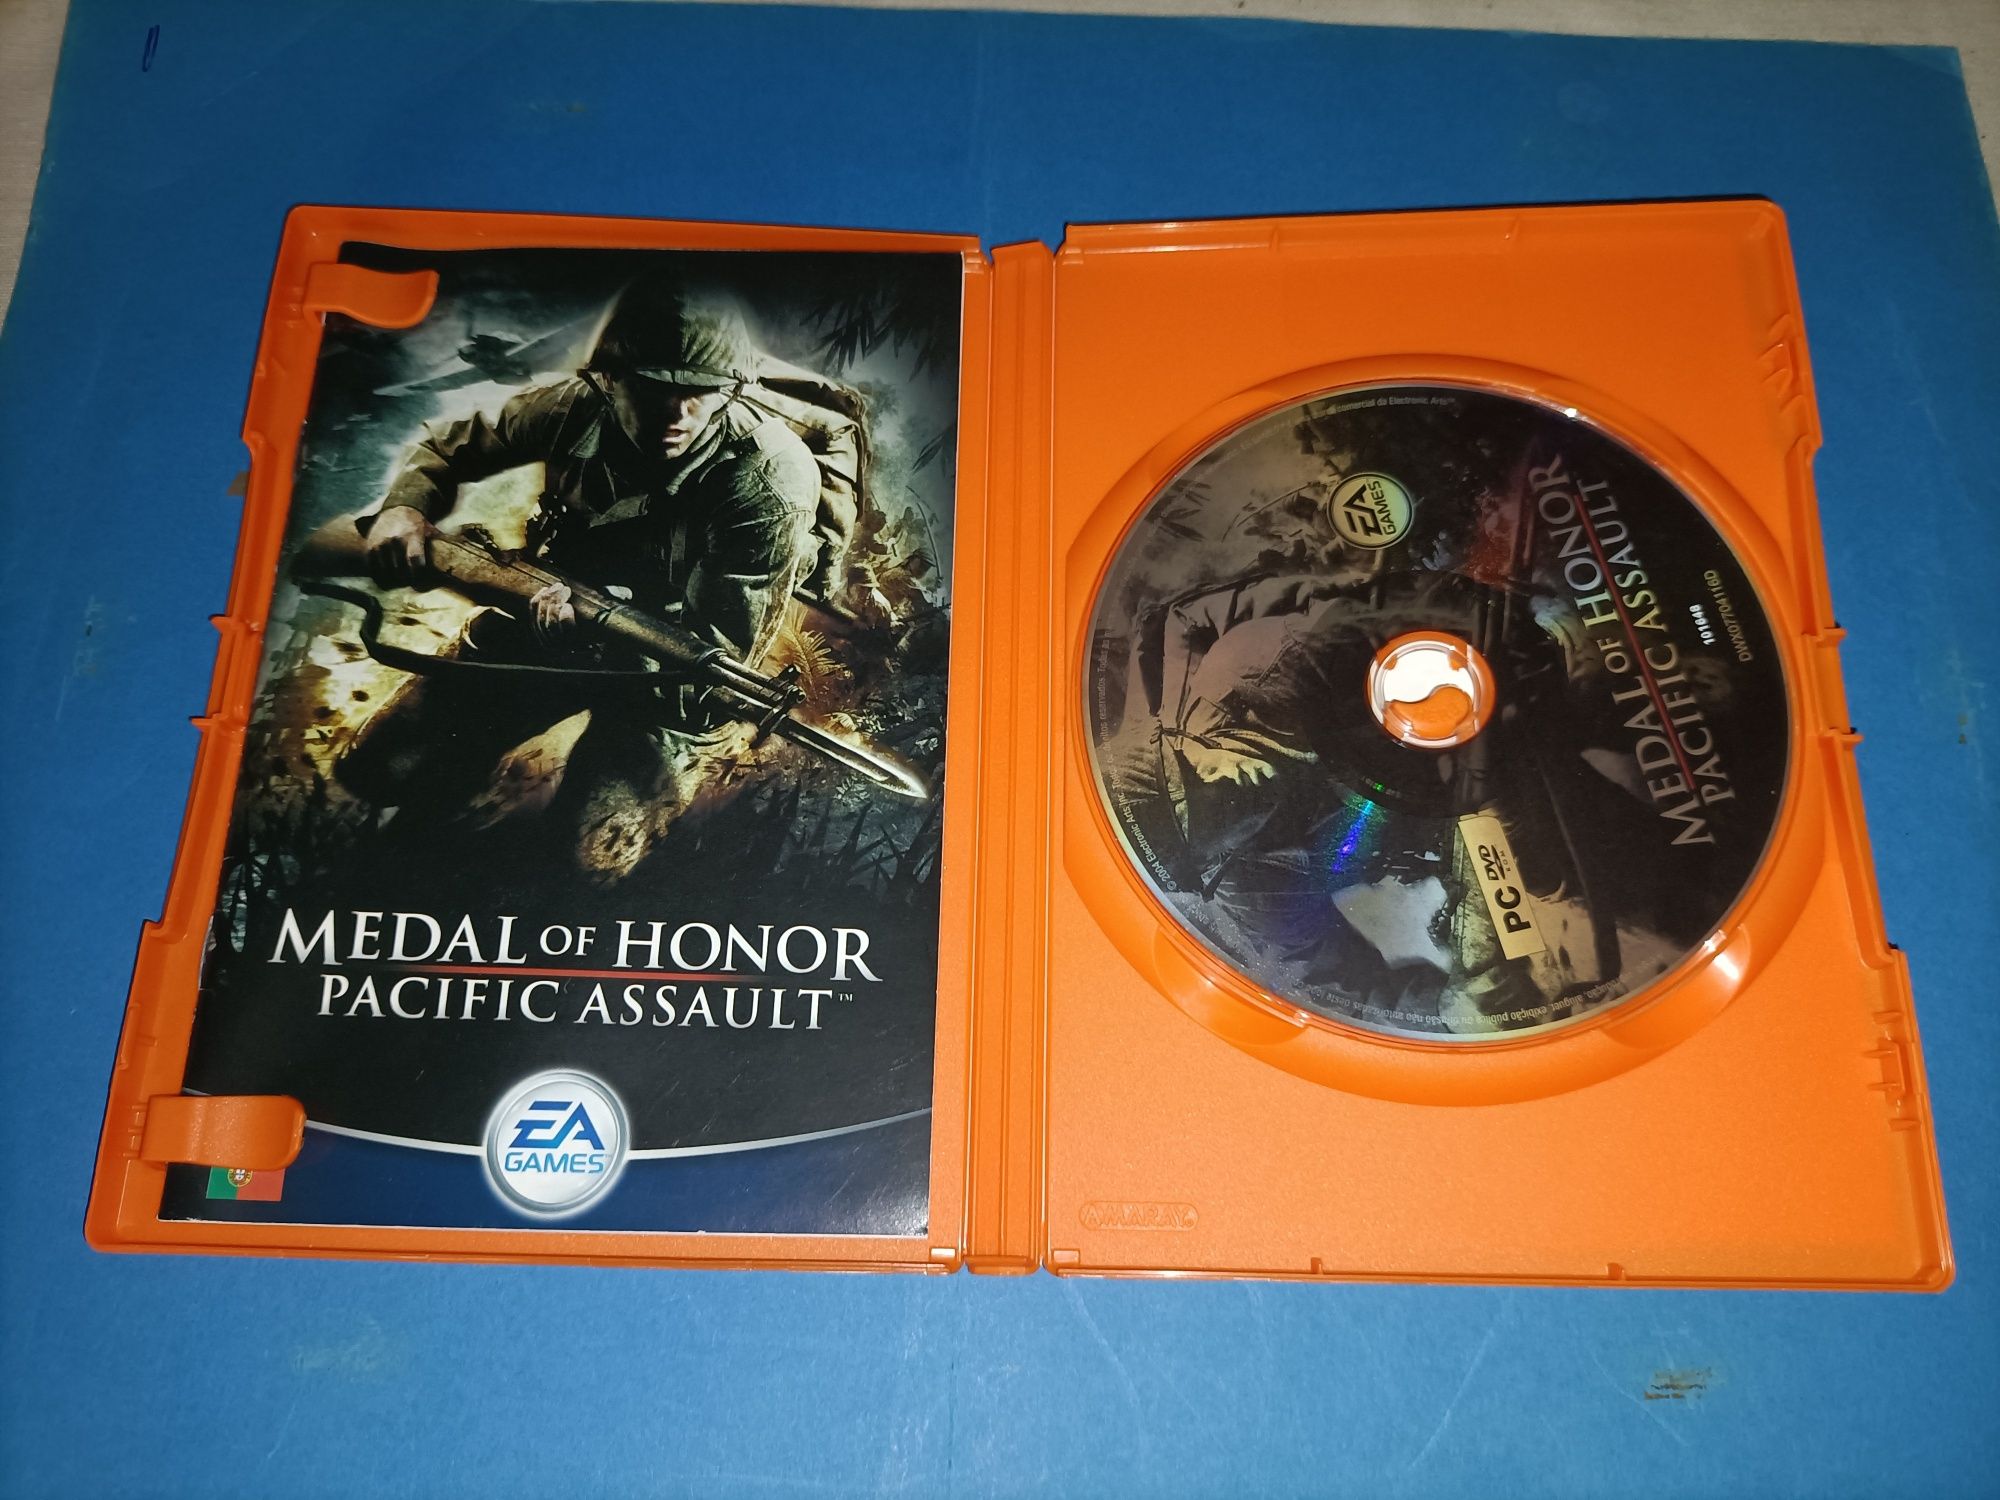 Medal of honor_Pacific Assault